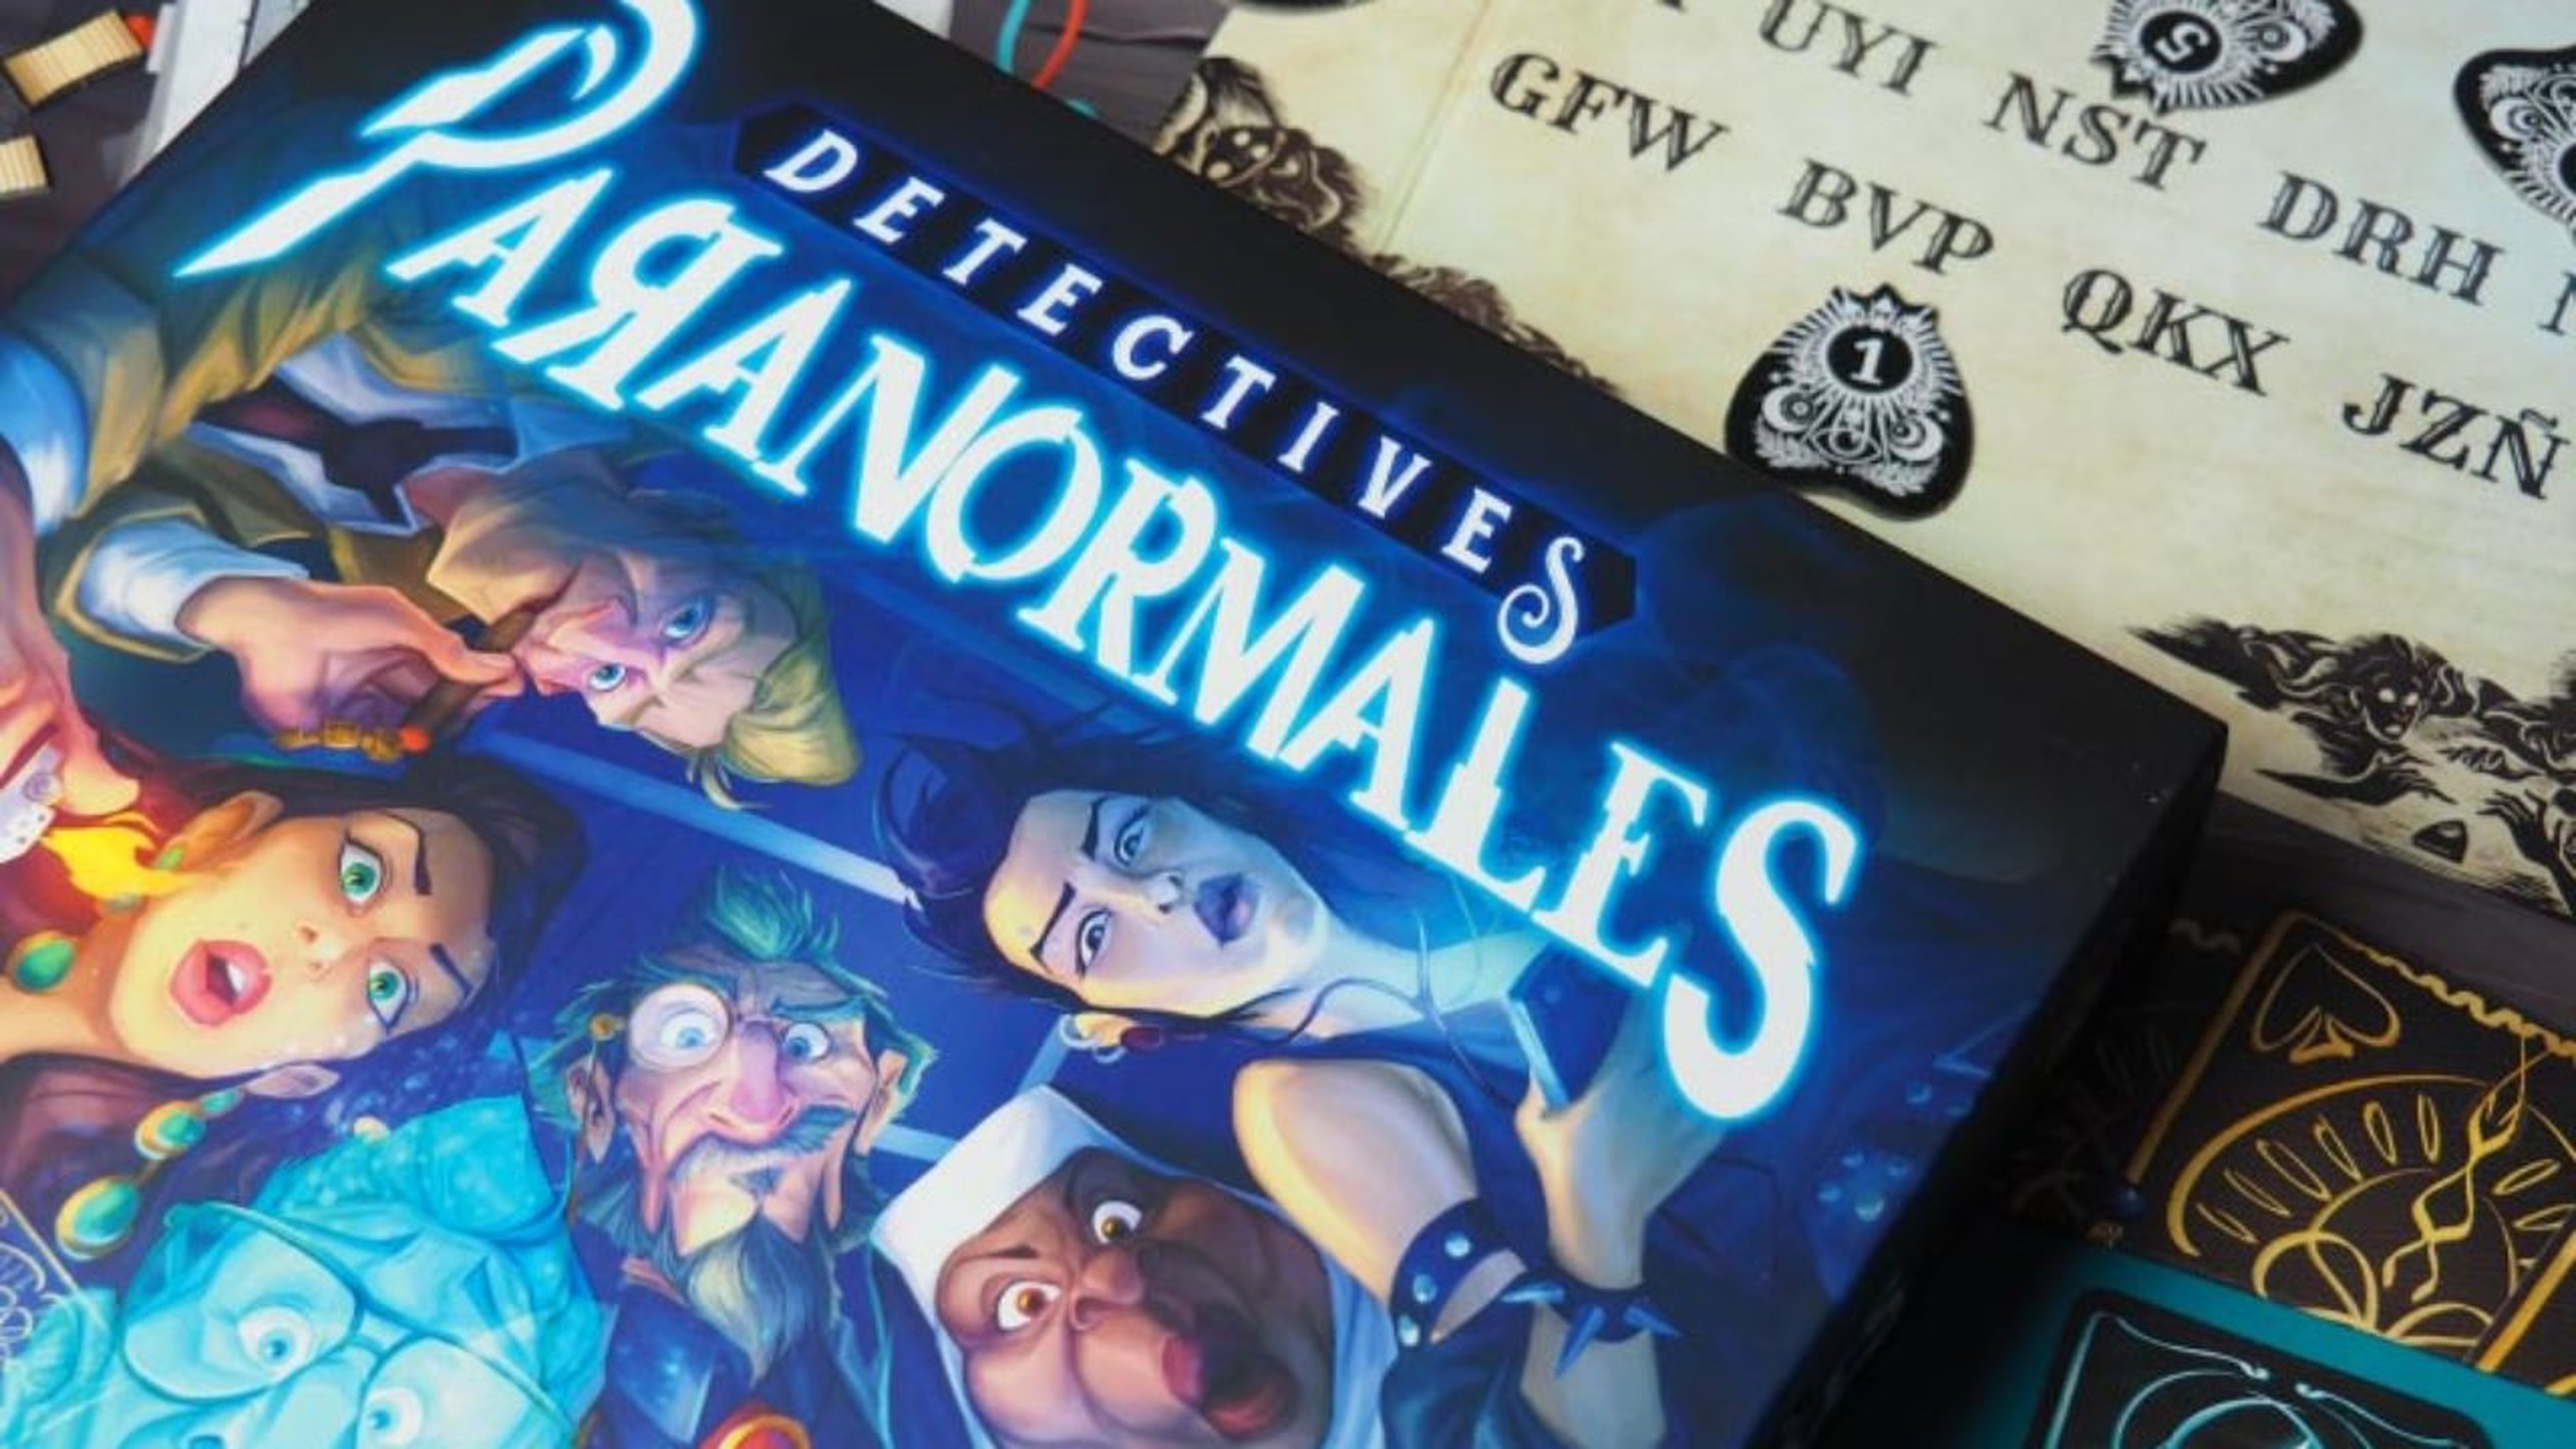 Detectives paranormales